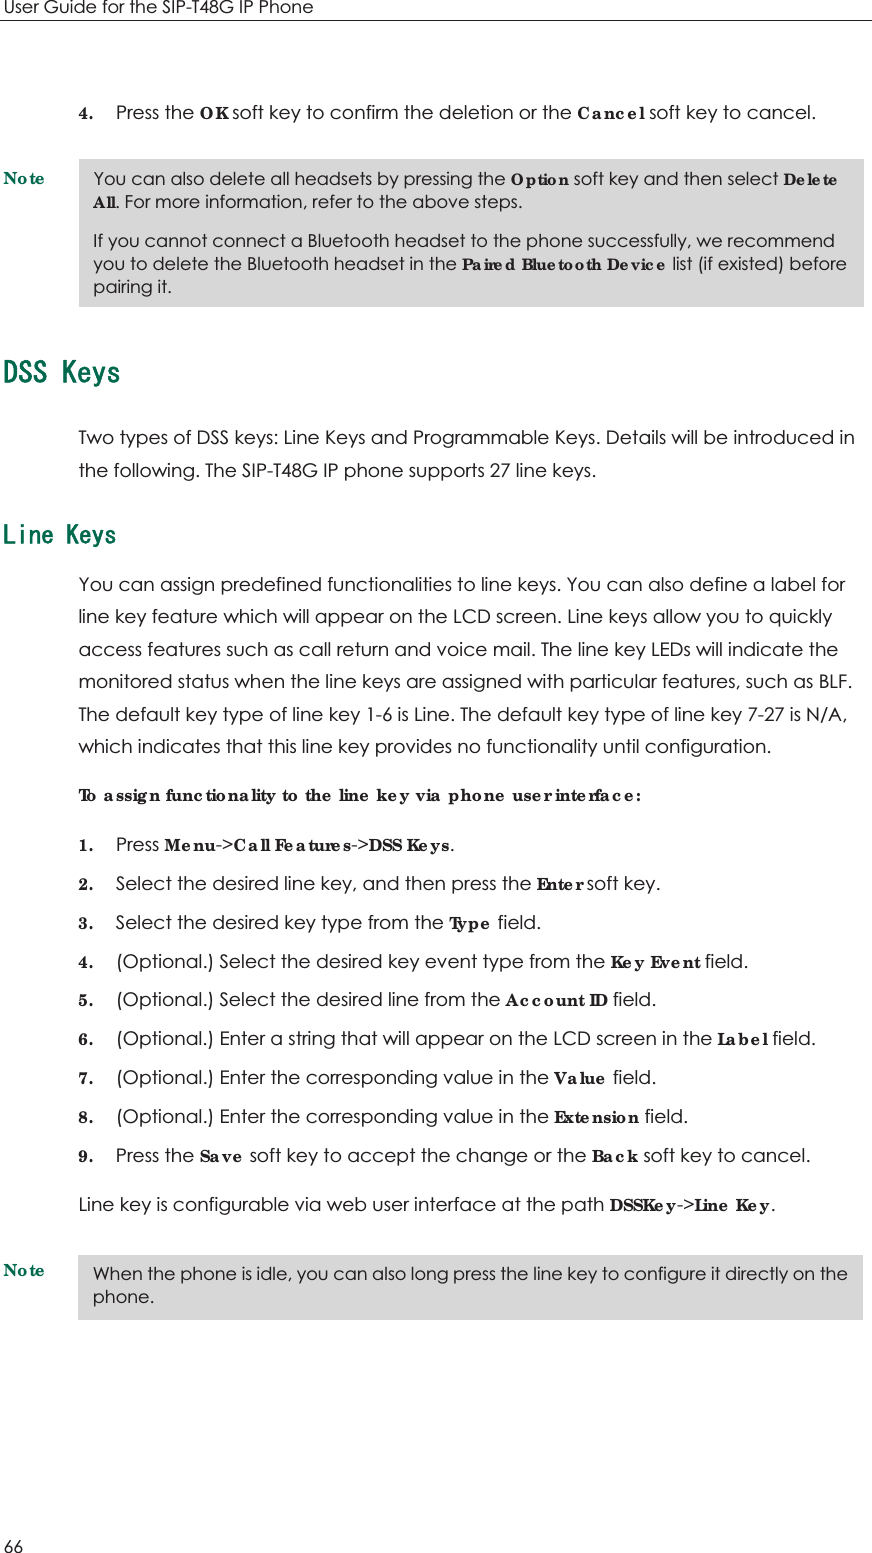 User Guide for the SIP-T48G IP Phone 66  4. Press the OK soft key to confirm the deletion or the Cancel soft key to cancel. Note&amp;55-G[UTwo types of DSS keys: Line Keys and Programmable Keys. Details will be introduced in the following. The SIP-T48G IP phone supports 27 line keys. .KPG-G[UYou can assign predefined functionalities to line keys. You can also define a label for line key feature which will appear on the LCD screen. Line keys allow you to quickly access features such as call return and voice mail. The line key LEDs will indicate the monitored status when the line keys are assigned with particular features, such as BLF. The default key type of line key 1-6 is Line. The default key type of line key 7-27 is N/A, which indicates that this line key provides no functionality until configuration. To assign functionality to the line key via phone user interface: 1. Press Menu-&gt;Call Features-&gt;DSS Keys. 2. Select the desired line key, and then press the Enter soft key. 3. Select the desired key type from the Type field. 4. (Optional.) Select the desired key event type from the Key Event field. 5. (Optional.) Select the desired line from the Account ID field. 6. (Optional.) Enter a string that will appear on the LCD screen in the Label field. 7. (Optional.) Enter the corresponding value in the Value field. 8. (Optional.) Enter the corresponding value in the Extension field. 9. Press the Save soft key to accept the change or the Back soft key to cancel. Line key is configurable via web user interface at the path DSSKey-&gt;Line Key.Note  You can also delete all headsets by pressing the Option soft key and then select Delete All. For more information, refer to the above steps. If you cannot connect a Bluetooth headset to the phone successfully, we recommend you to delete the Bluetooth headset in the Paired Bluetooth Device list (if existed) before pairing it. When the phone is idle, you can also long press the line key to configure it directly on the phone. 